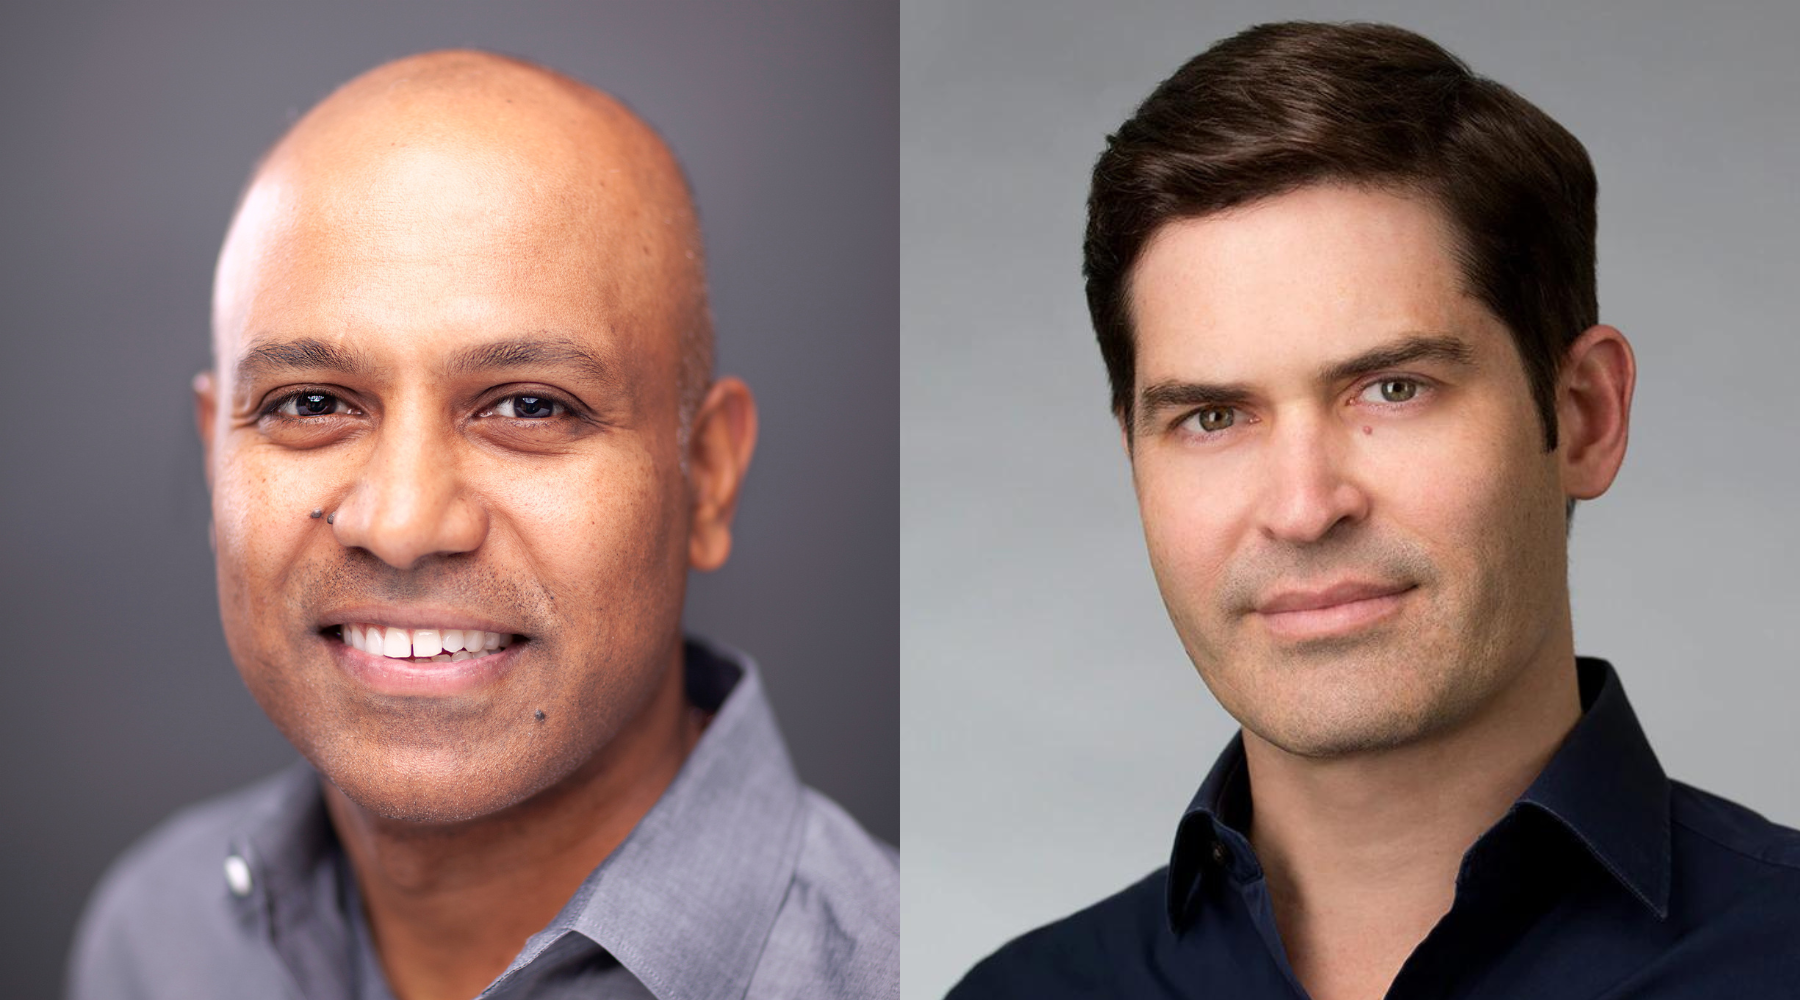 WPP and Sprinklr Partner to Bring AI-powered Customer Experience Management Solutions to Global Brands